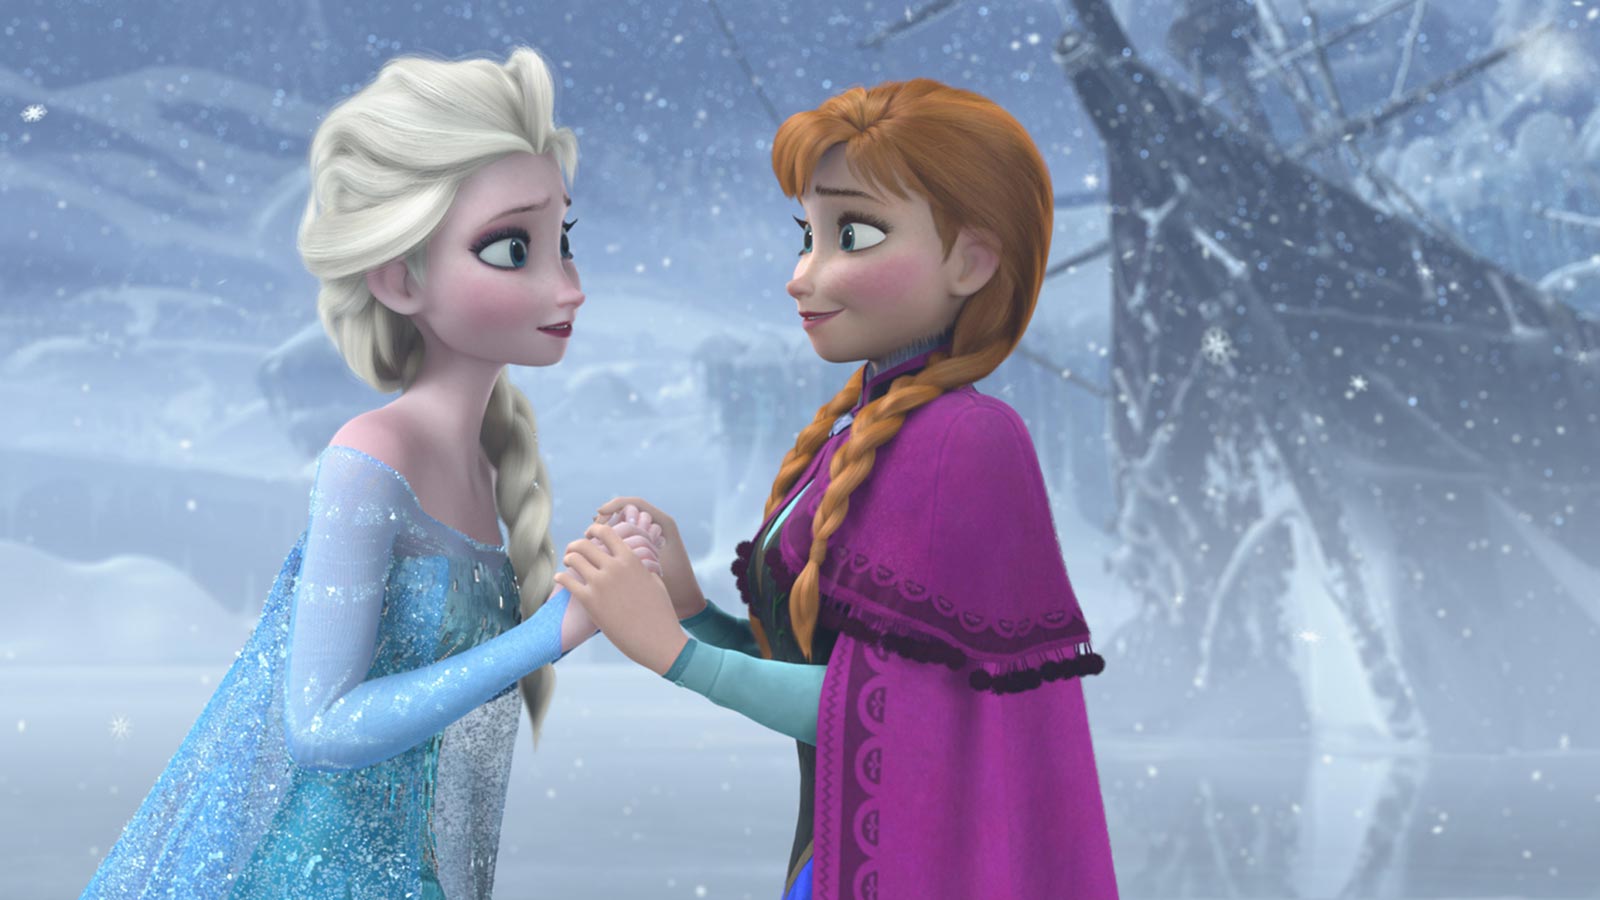 Elementary School Students Score Better Than Adults on This General Knowledge Quiz Frozen movie